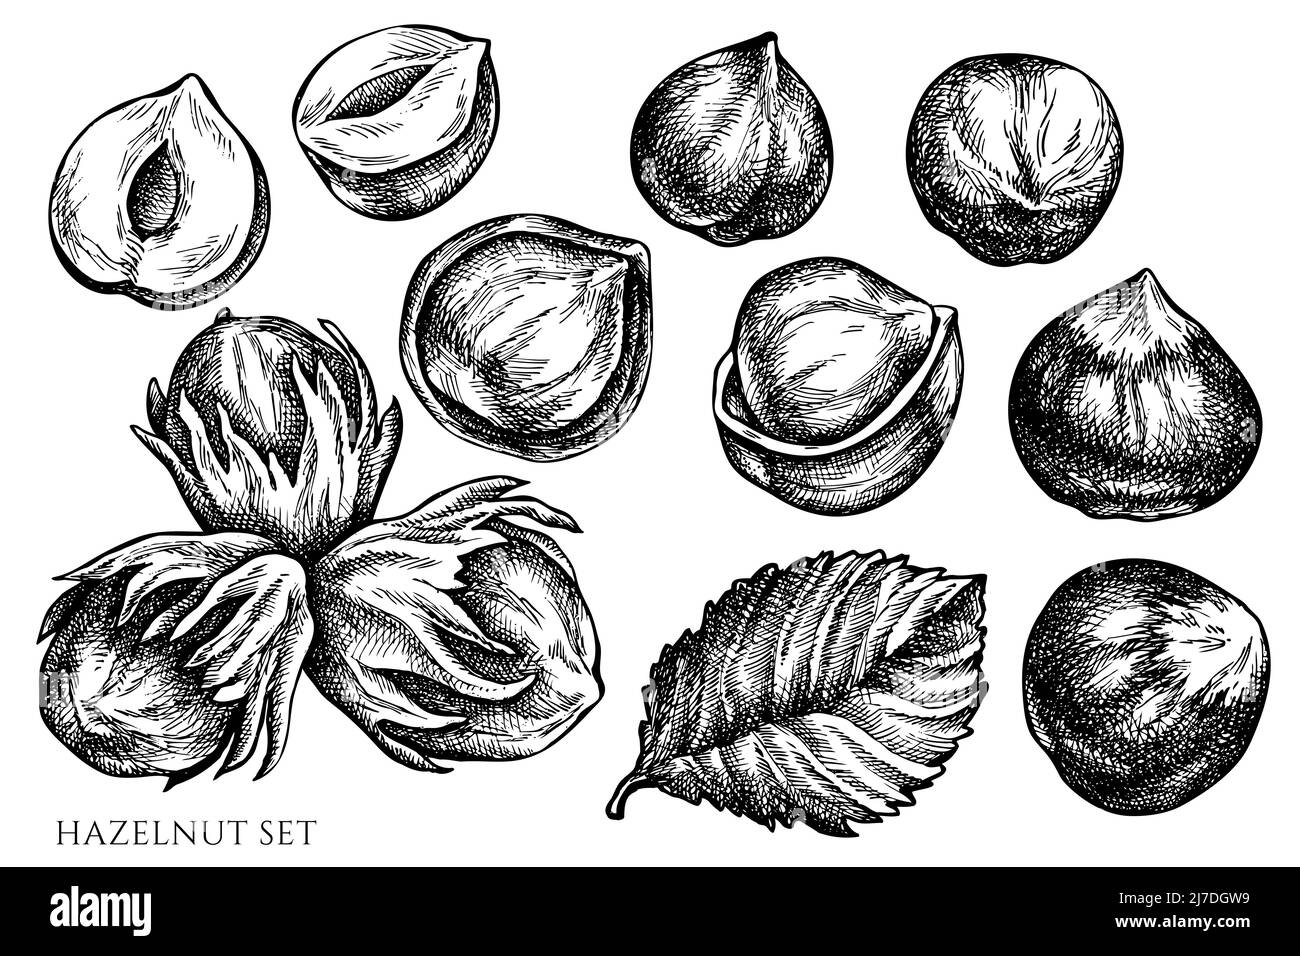 Vector set of hand drawn black and white hazelnut Stock Vector